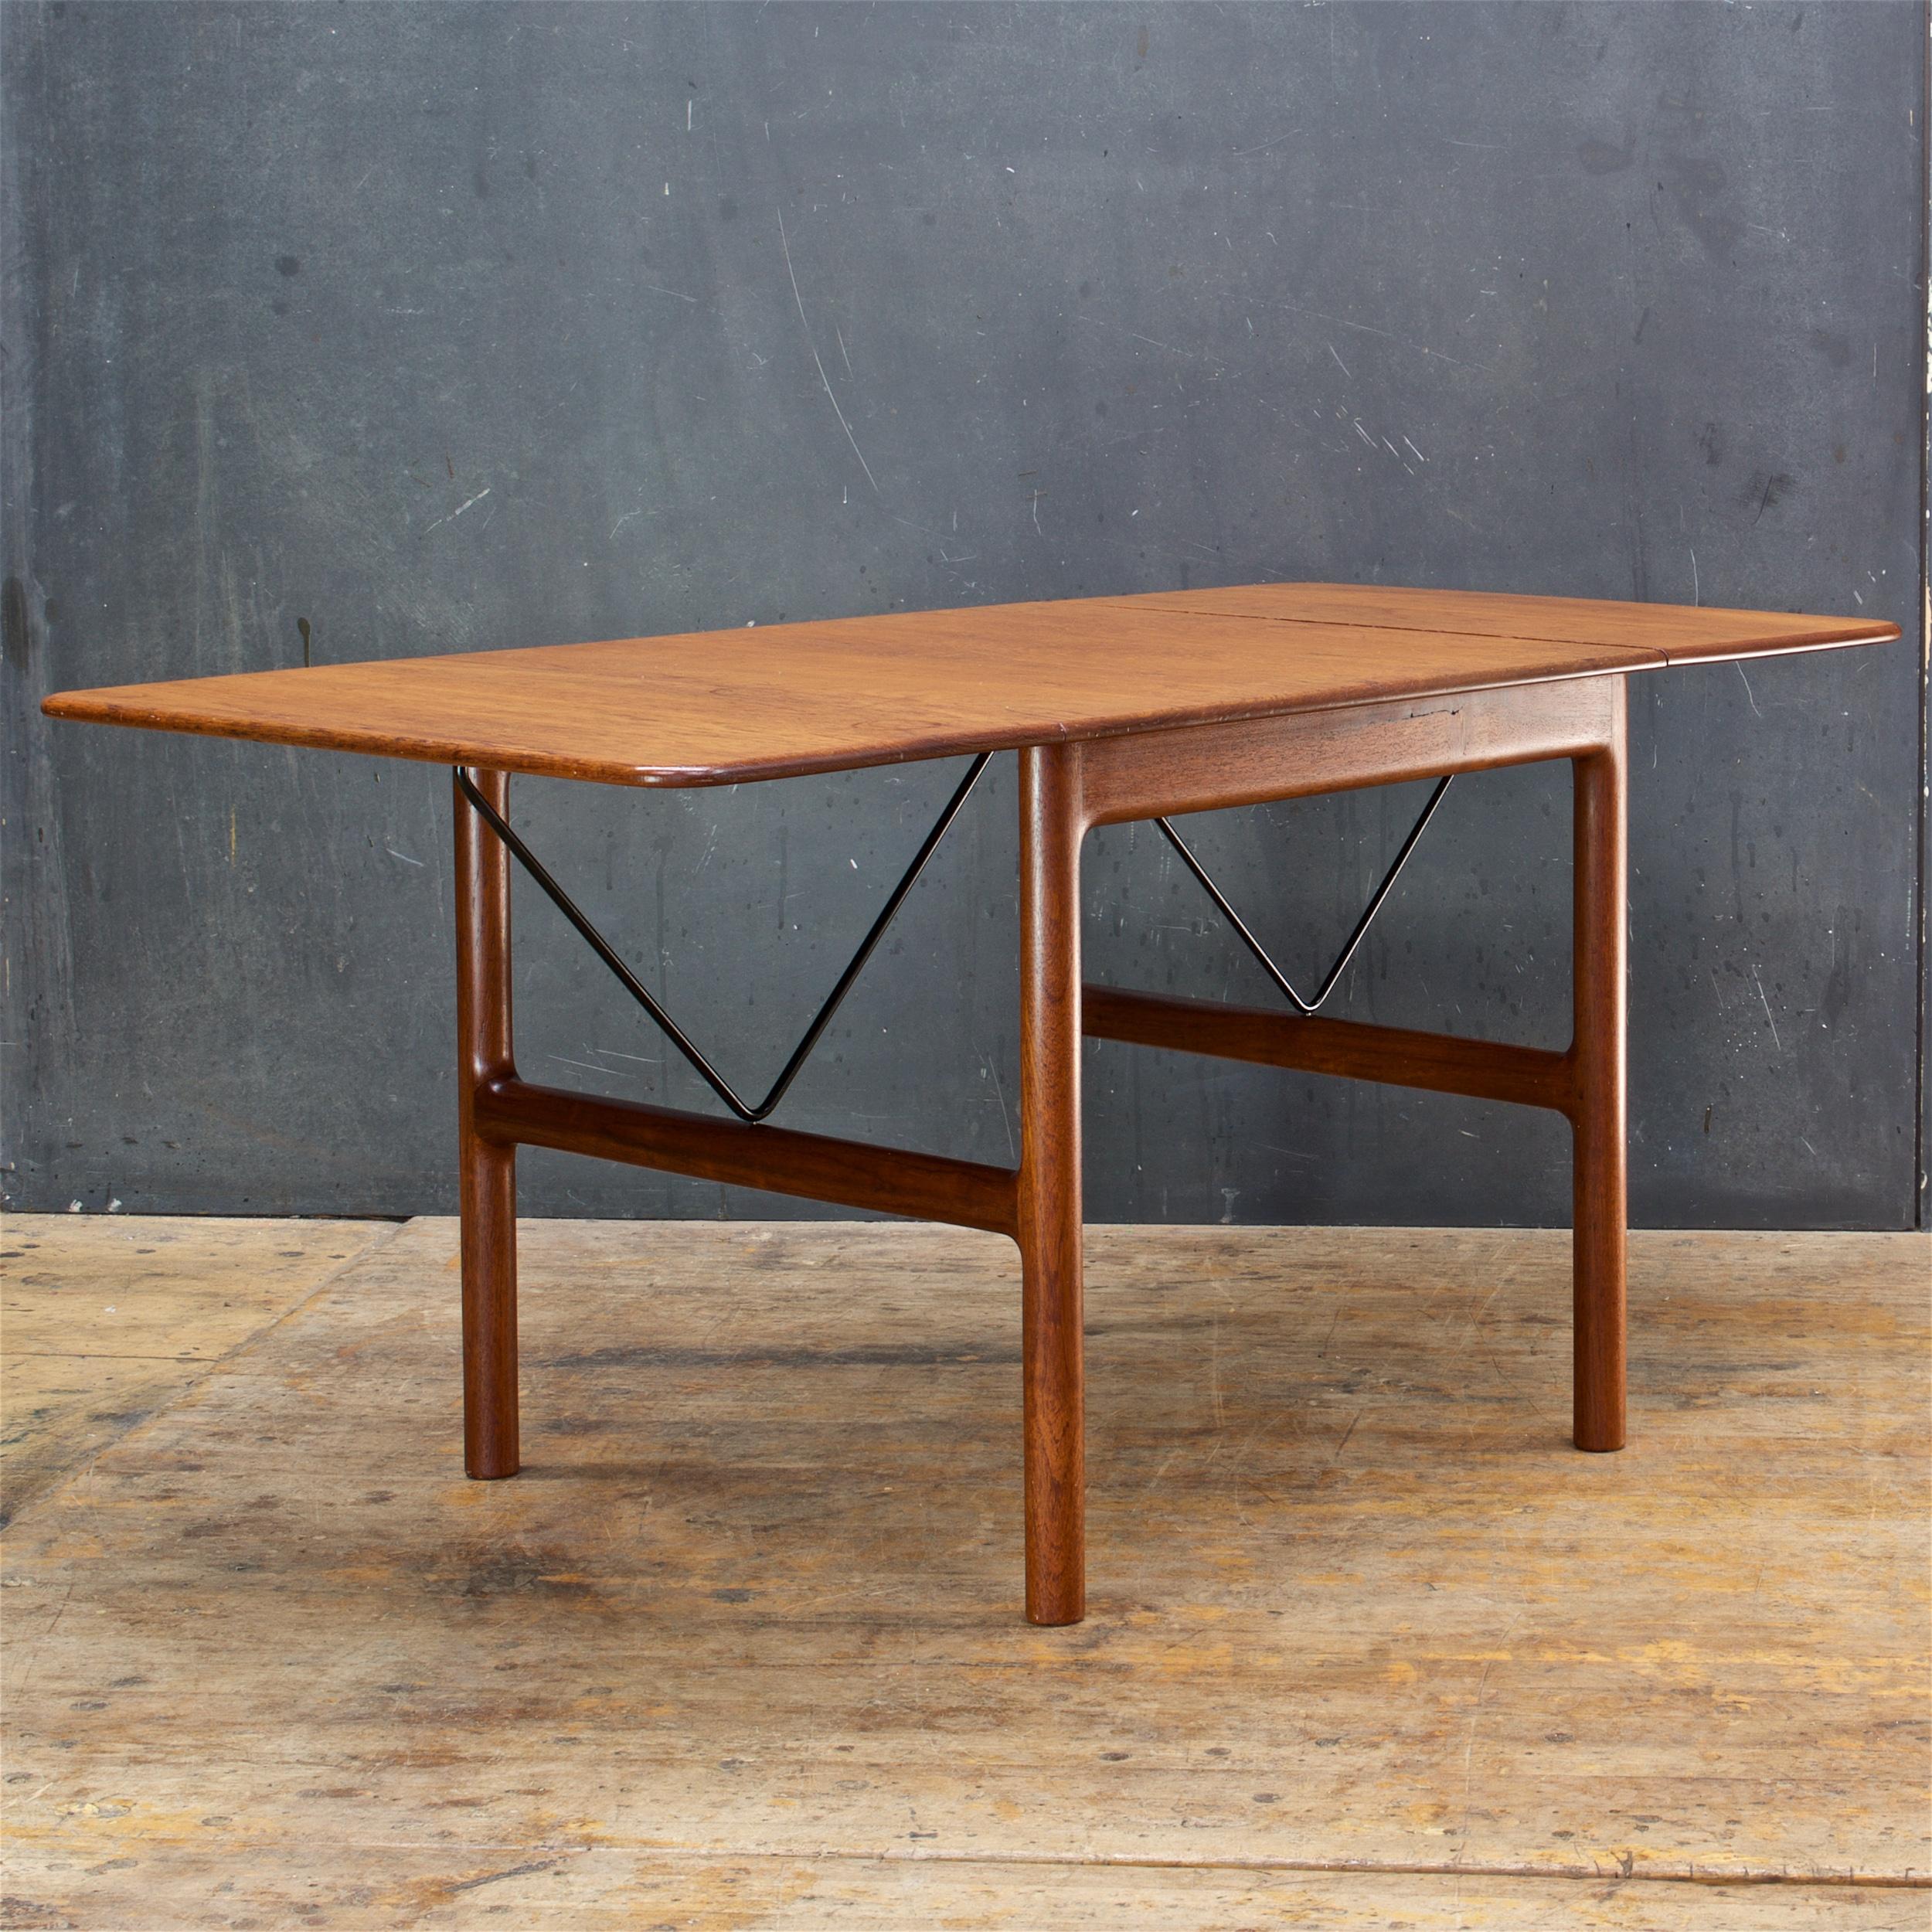 1950s Danish Architects Embassy Drop-Leaf Teak Table in Style of Hans Wegner In Fair Condition For Sale In Hyattsville, MD